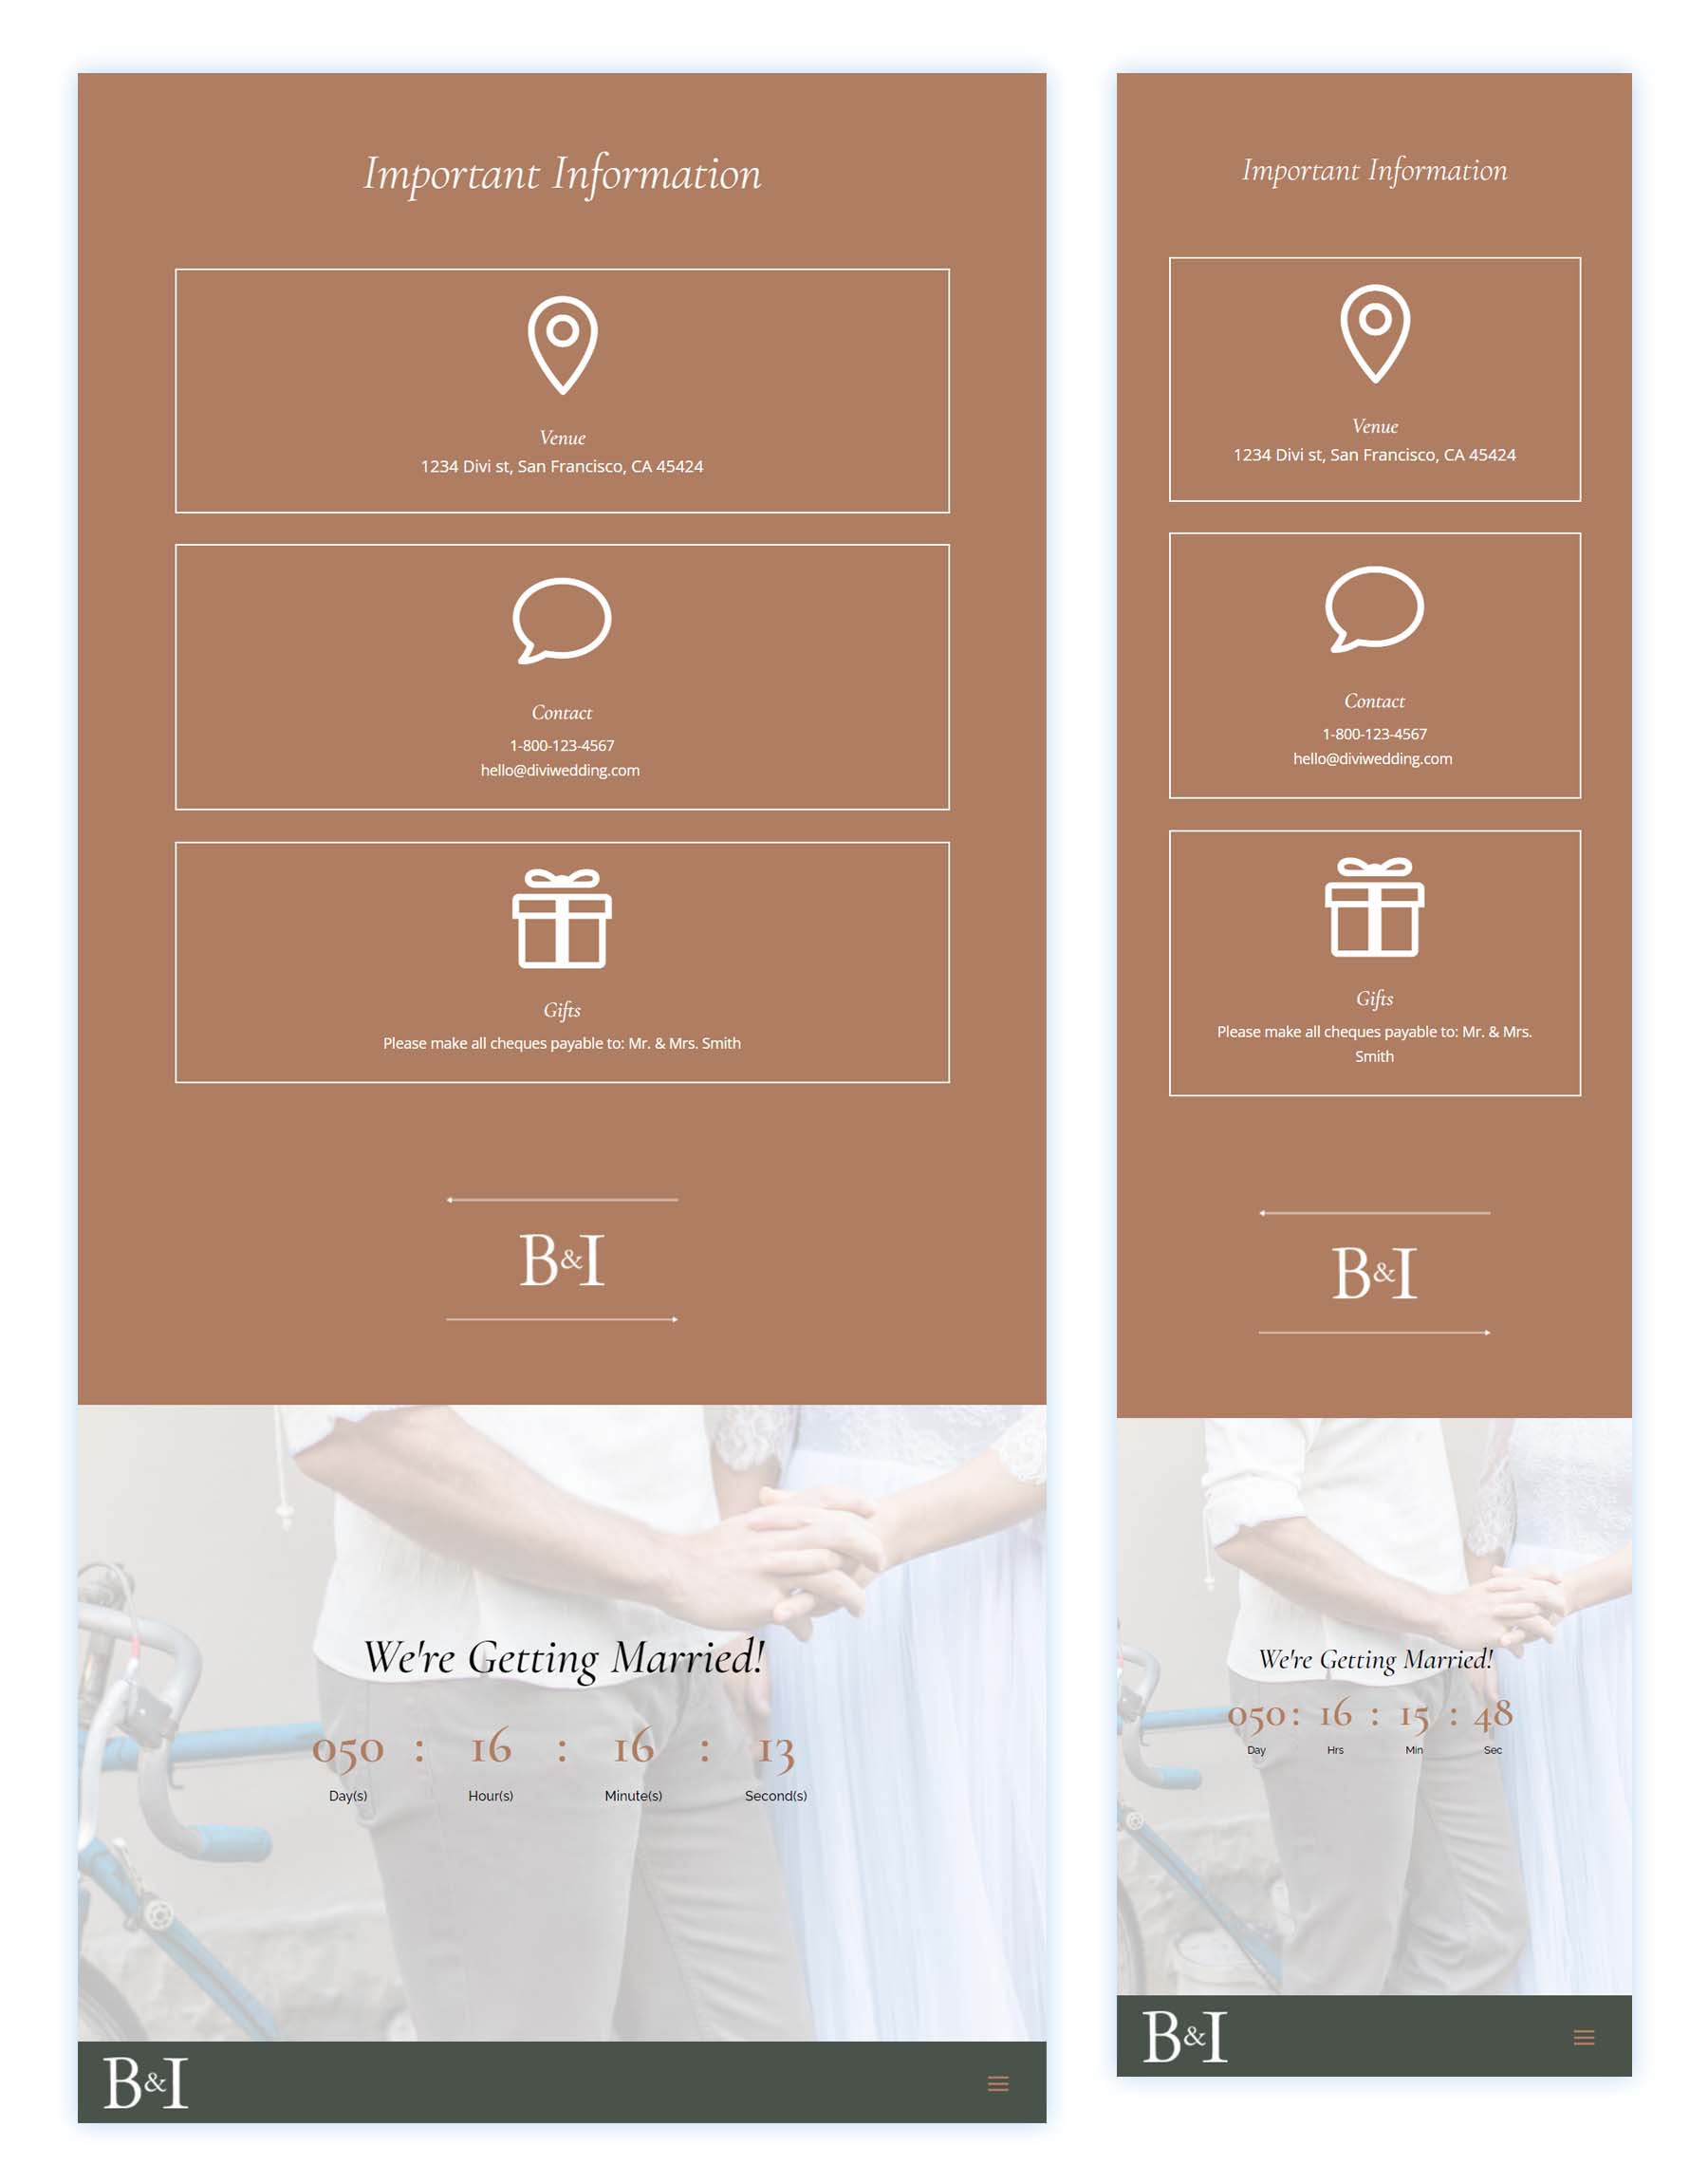 Divi Wedding Invitation Footer Layout for tablet and mobile